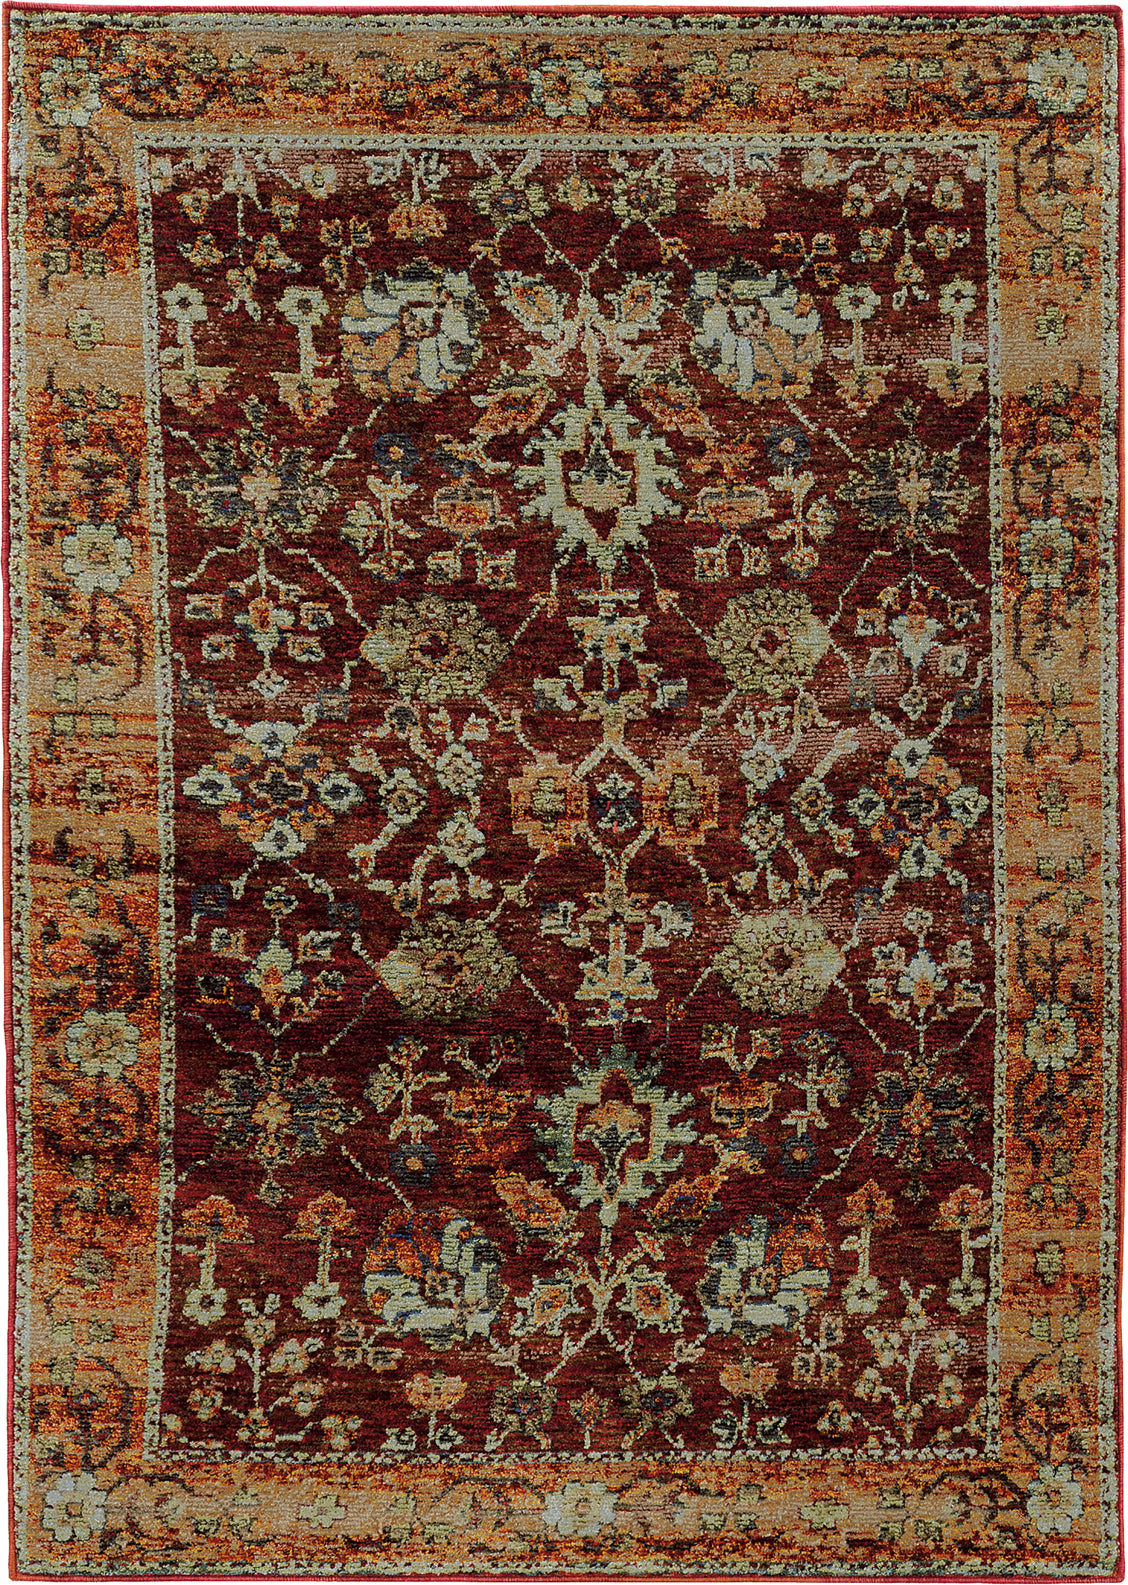 Oriental Weavers Andorra 7154A Red/ Gold Area Rug main image